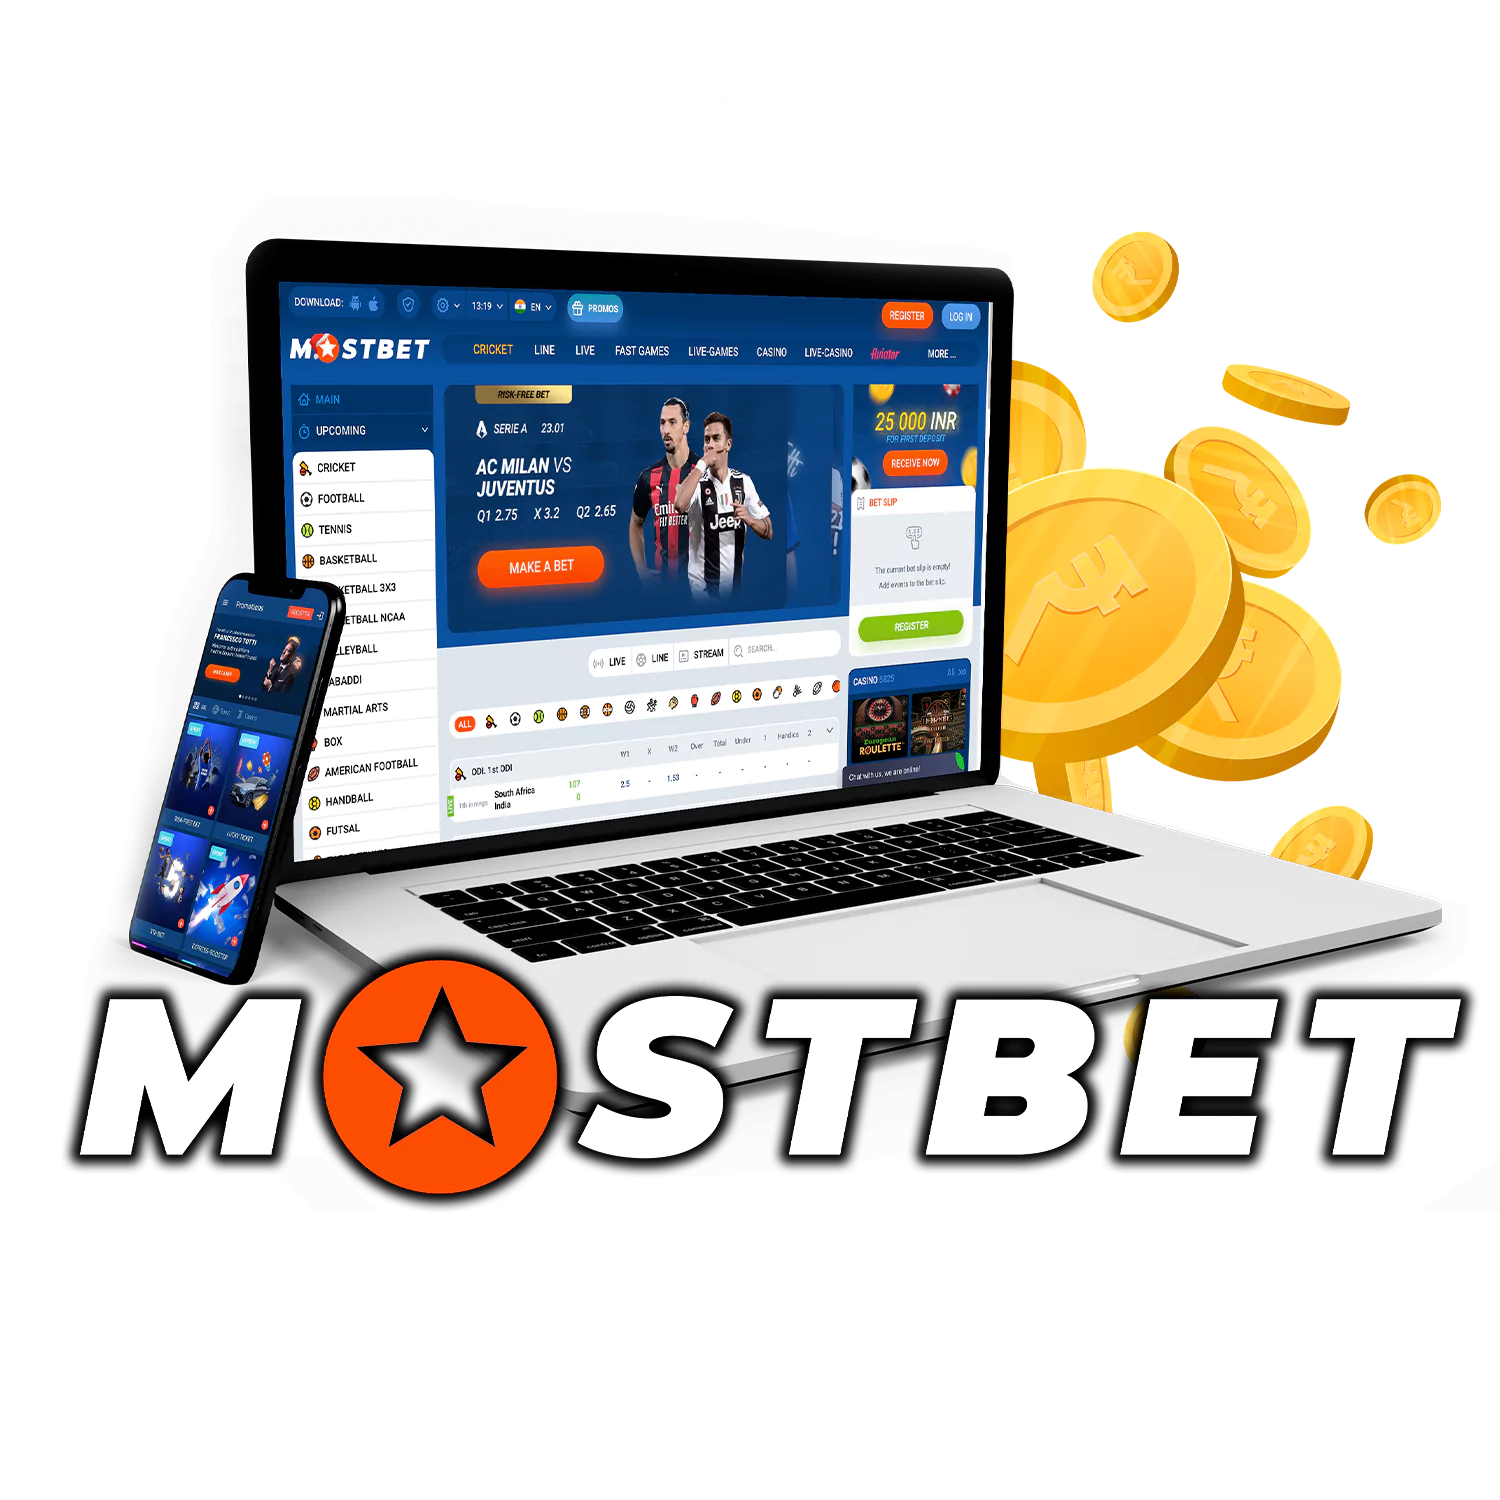 5 Things People Hate About Mostbet Betting Company and Casino in Tunisia